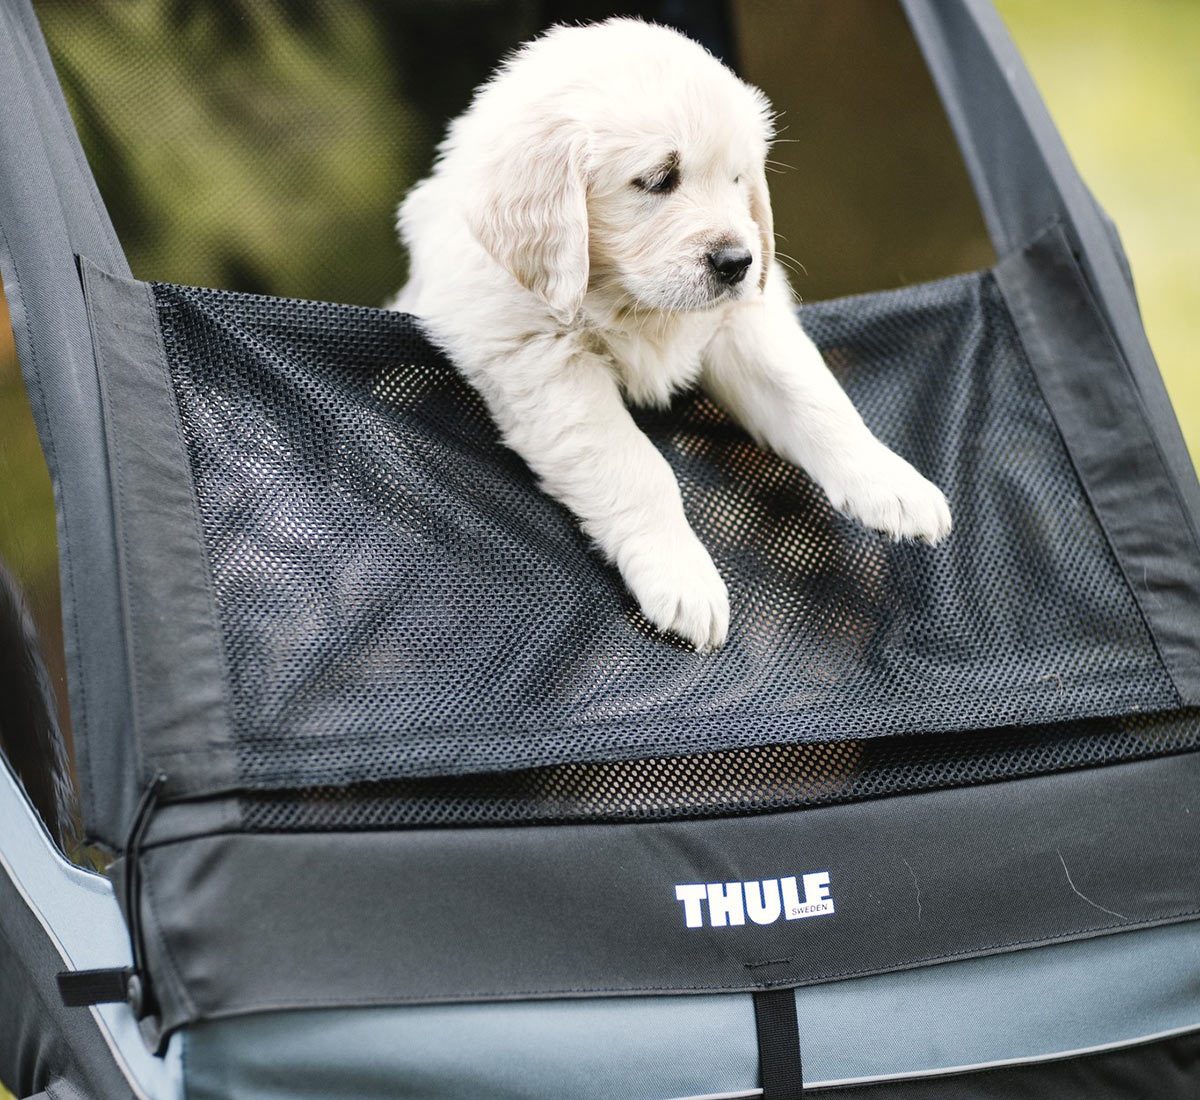 Thule Kids' Car Seats and Dog Transport plans, bike trailer puppy upgrade